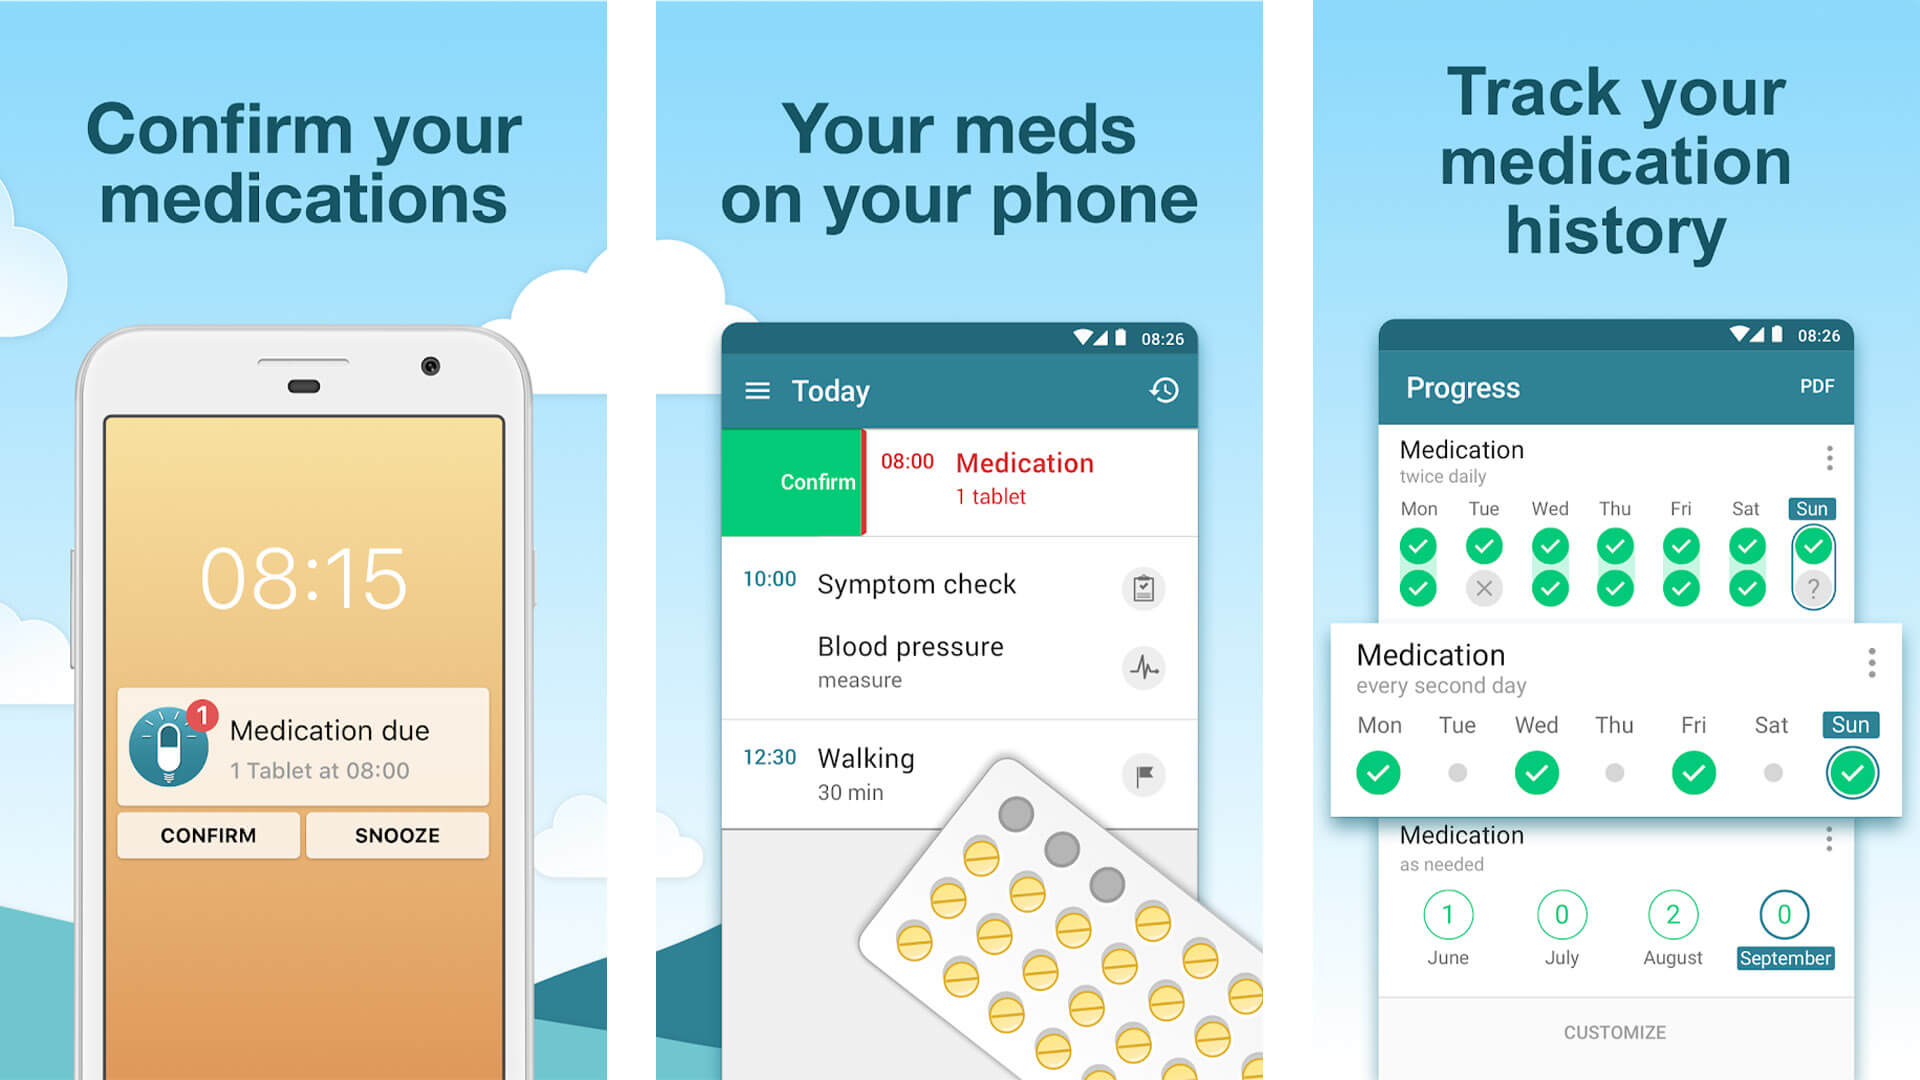 Best Medication Apps to Manage Your Health: Track, Schedule, and Refill Prescriptions